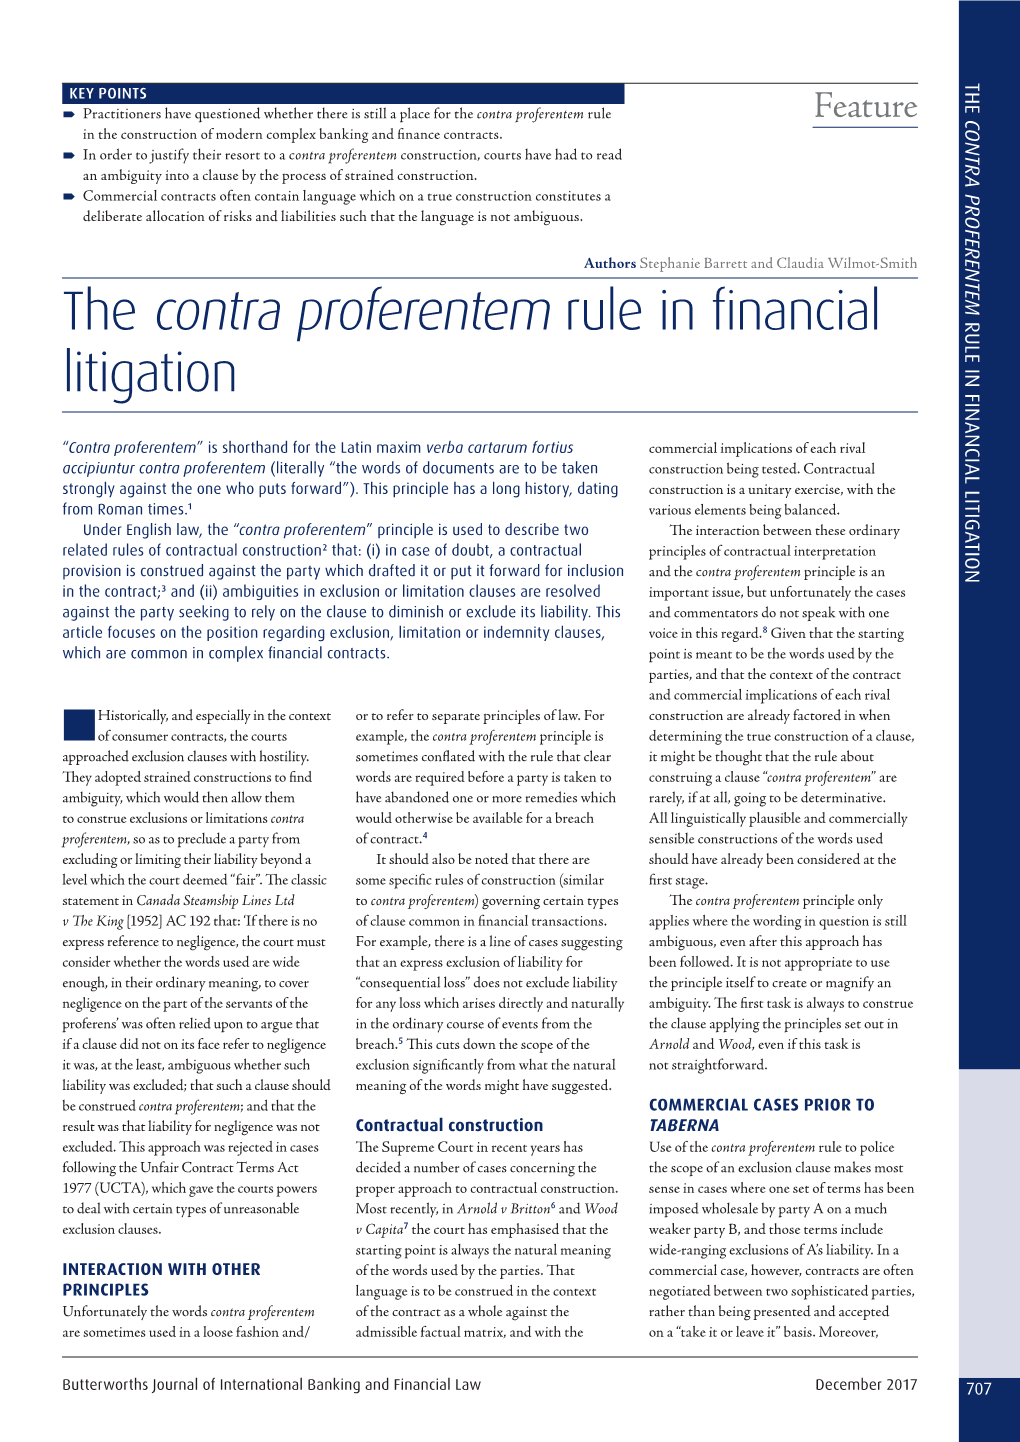 The Contra Proferentem Rule in Financial LITIGATION RULE in FINANCIAL Litigation